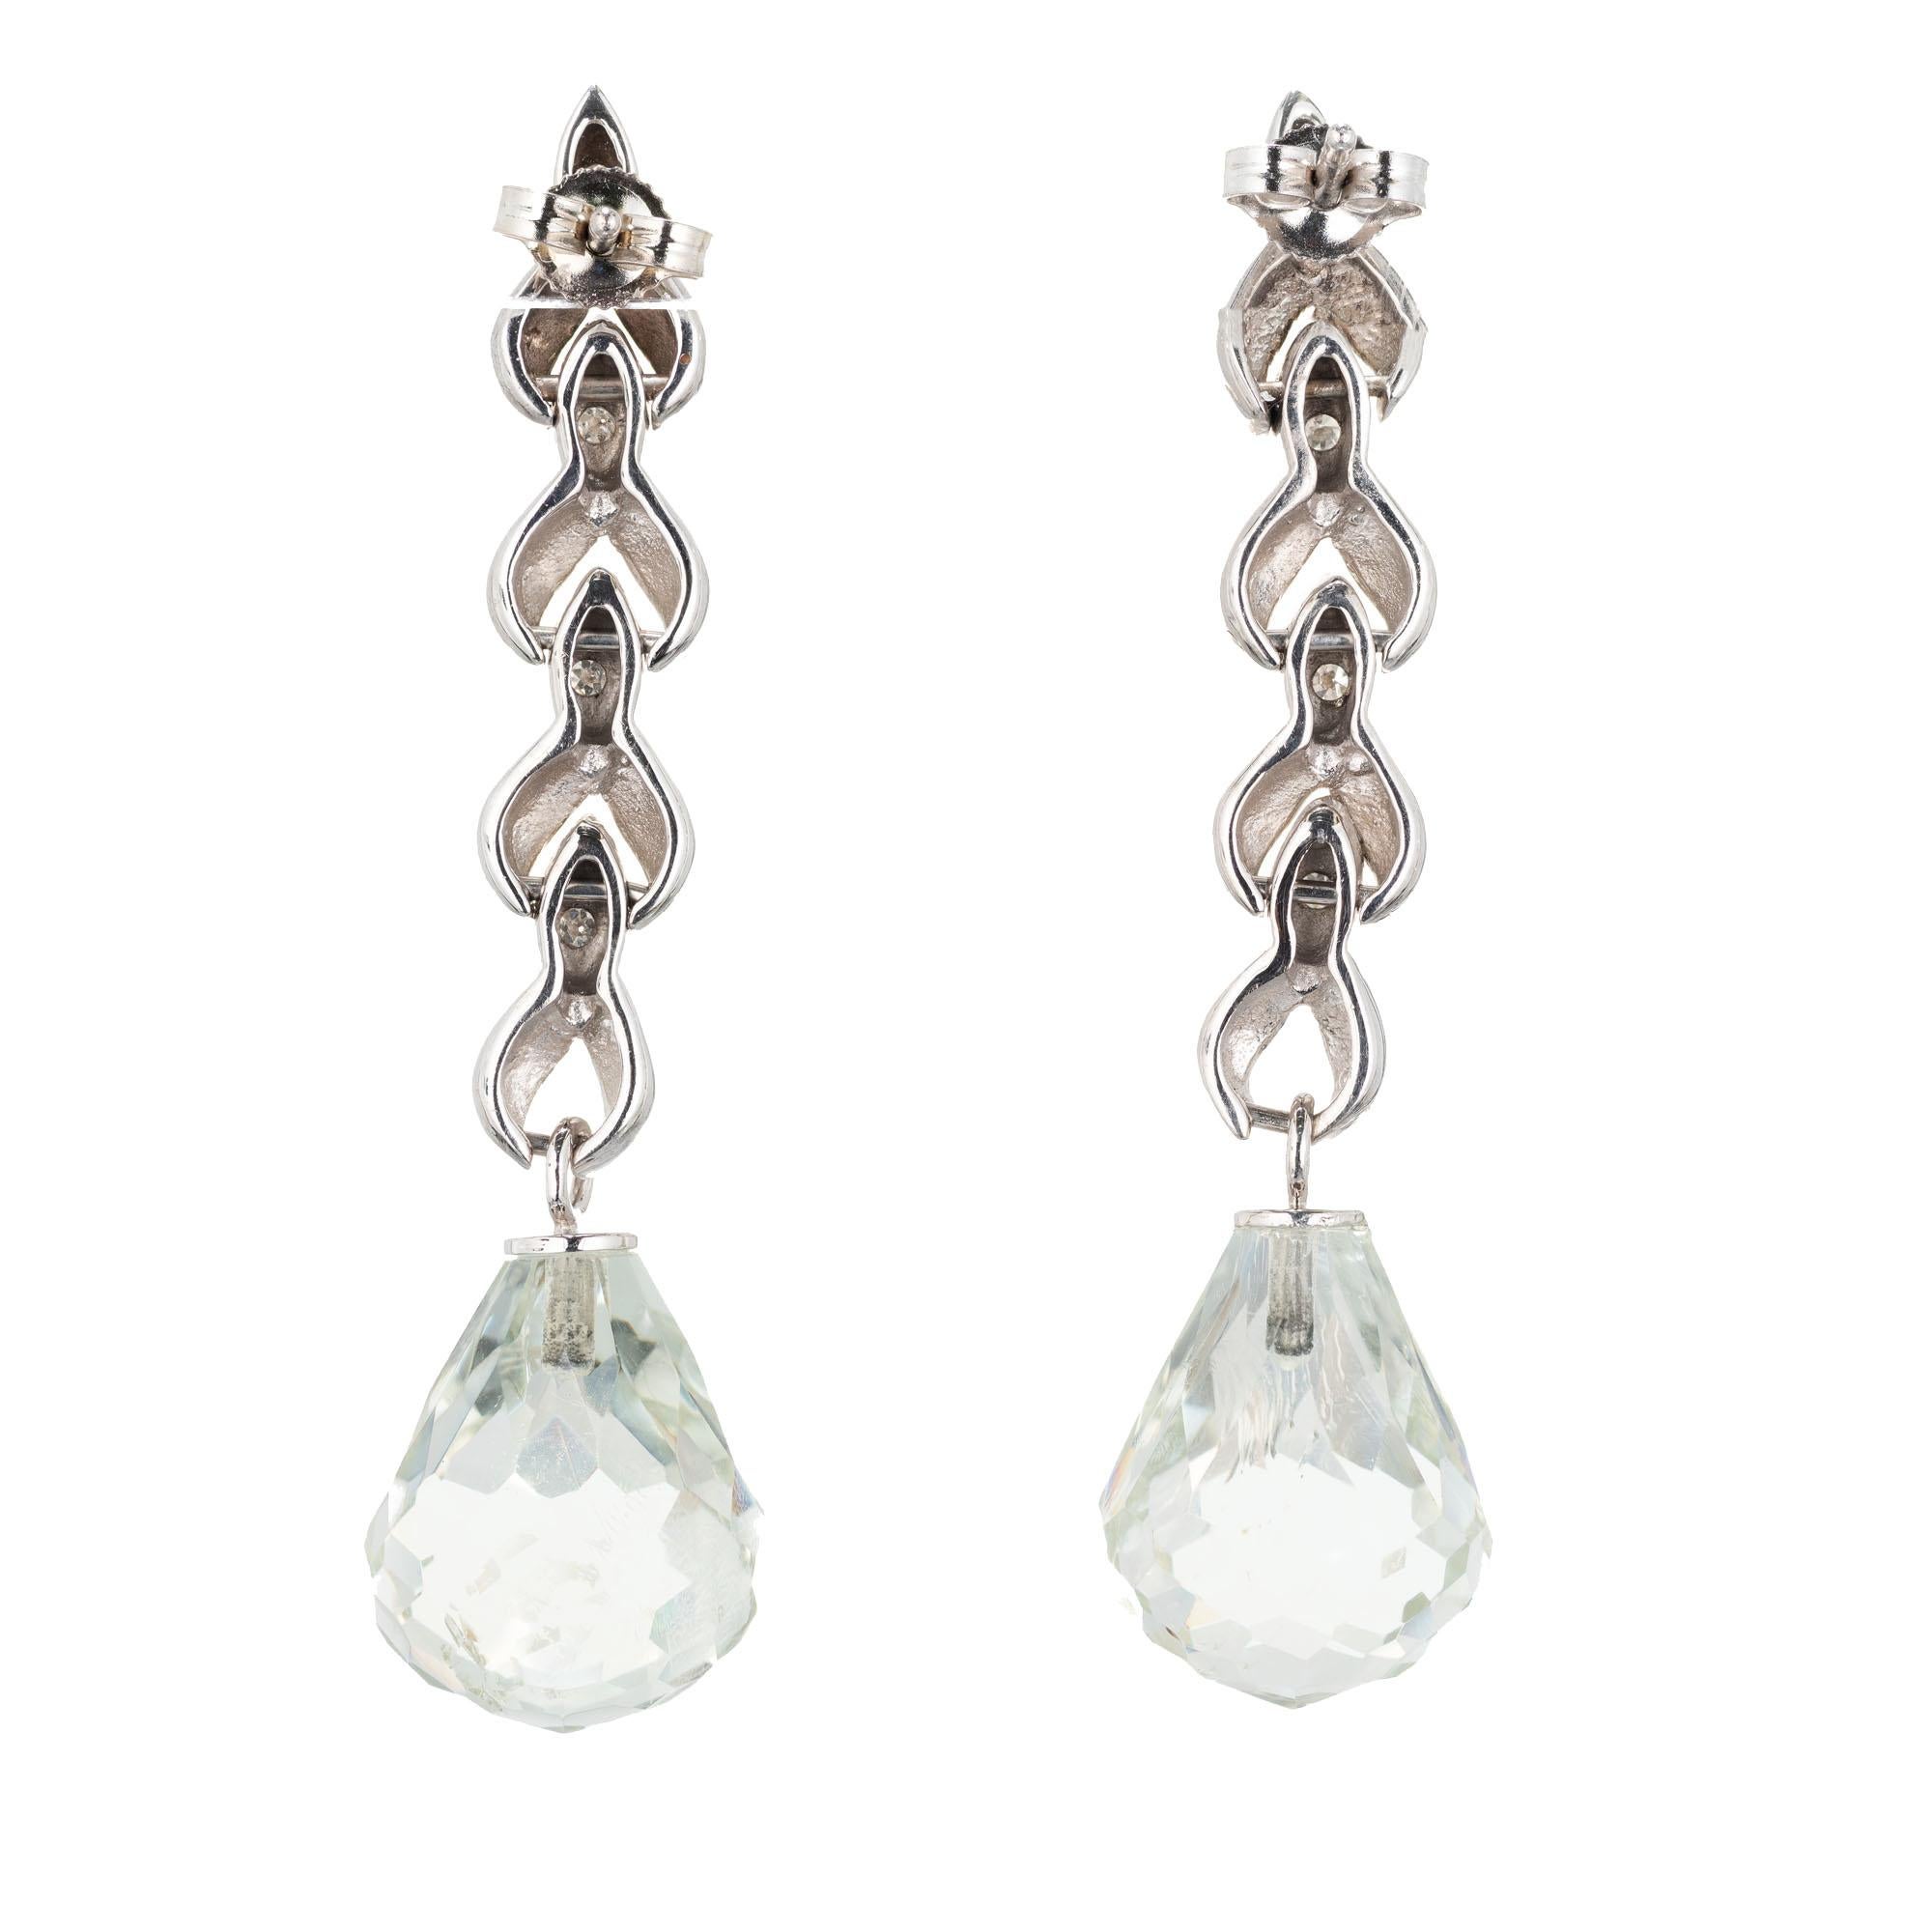 1940s Aqua and diamond dangle drop earrings. 14k white gold. Two briolette cut light green Quartz bottoms with natural inclusions with diamond accents. The briolette cutting catches and reflects the light. 

2 briolette cut natural Quartz, approx.